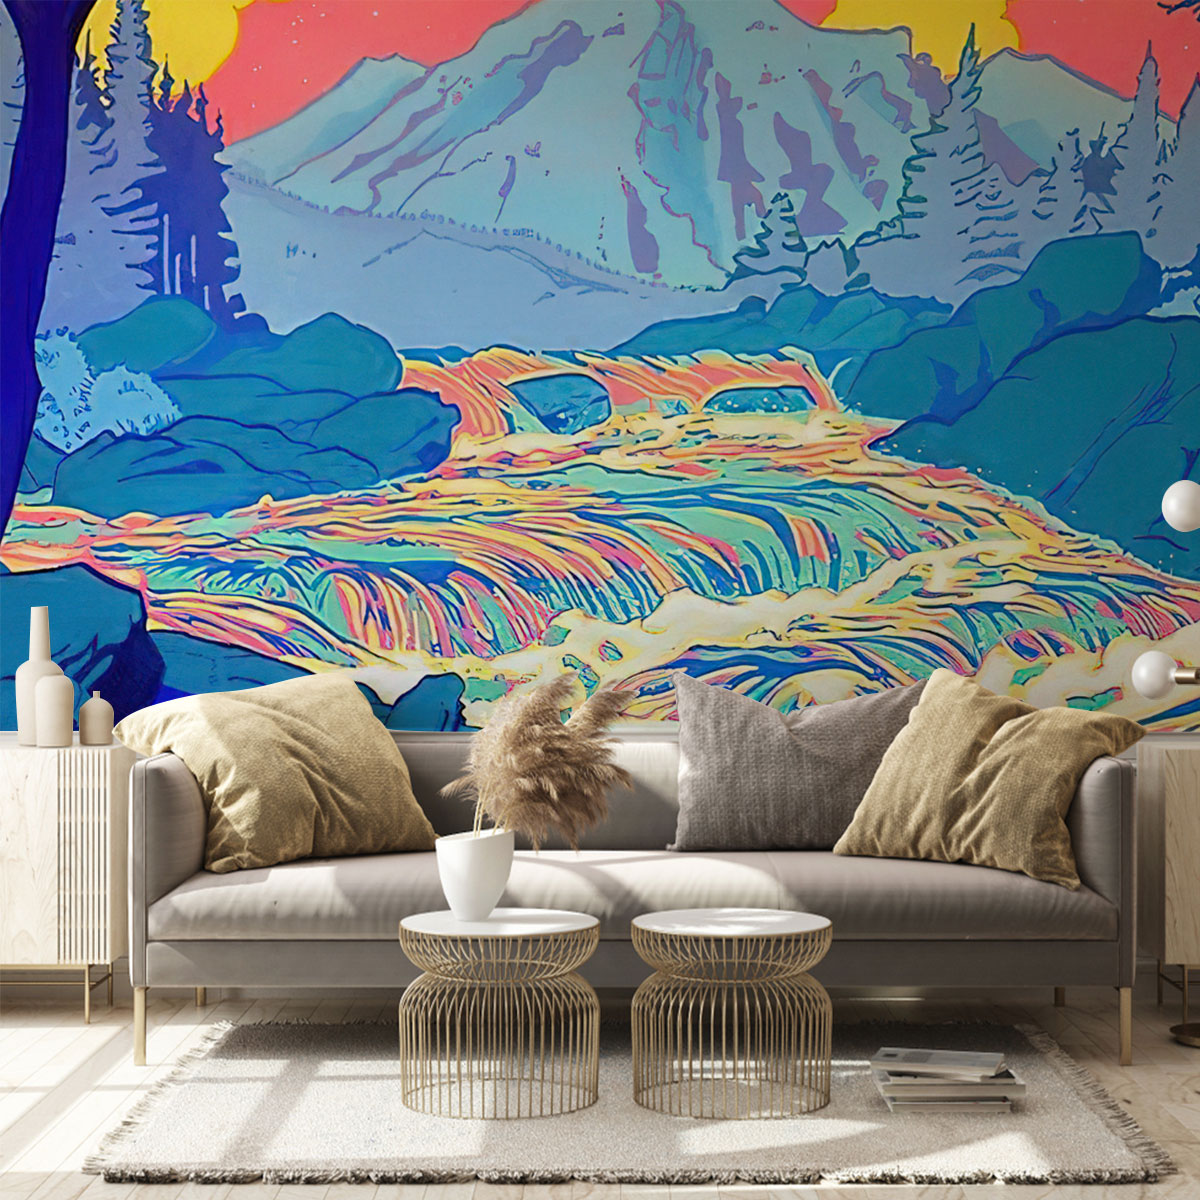 Vintage Abstract River Wall Mural